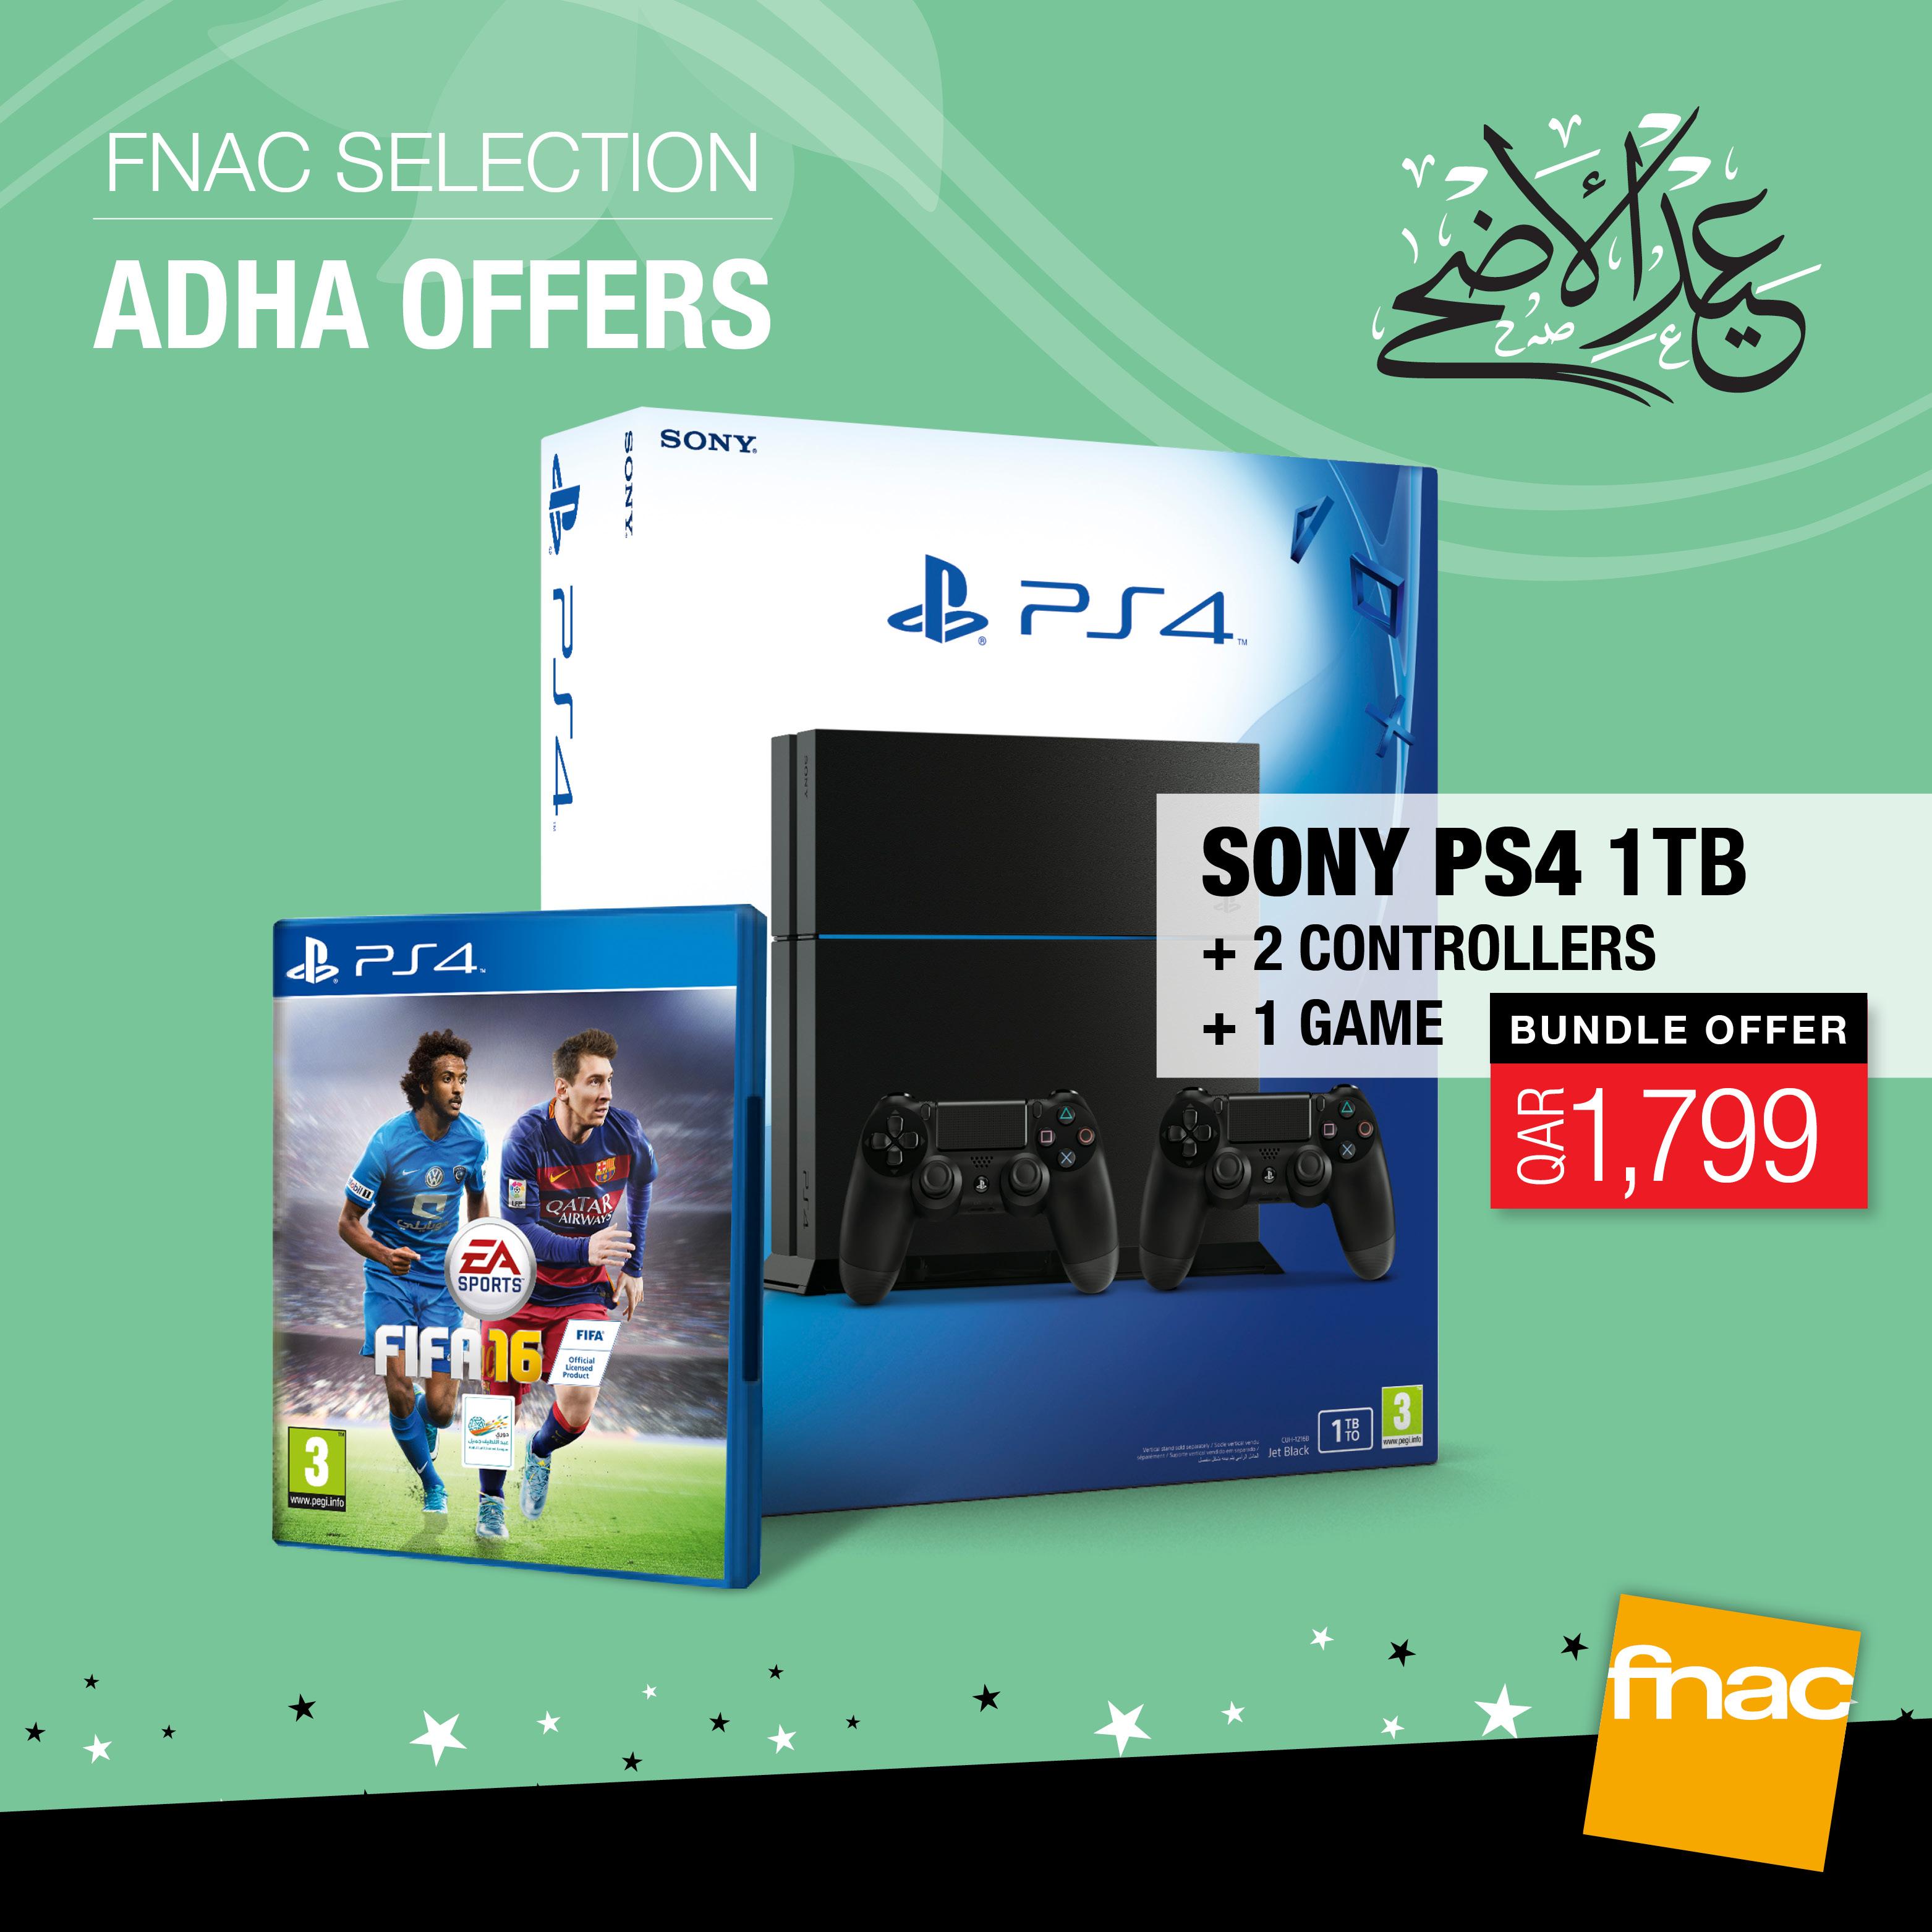 pasta Confuse parent Fnac Qatar on Twitter: "ADHA OFFER | SONY PS4 1TB + 2 Controllers + 1 Game  Bundle is now yours for QAR 1,799! #FnacQatar #LagoonaMall  http://t.co/JLYNMNgaNj" / Twitter